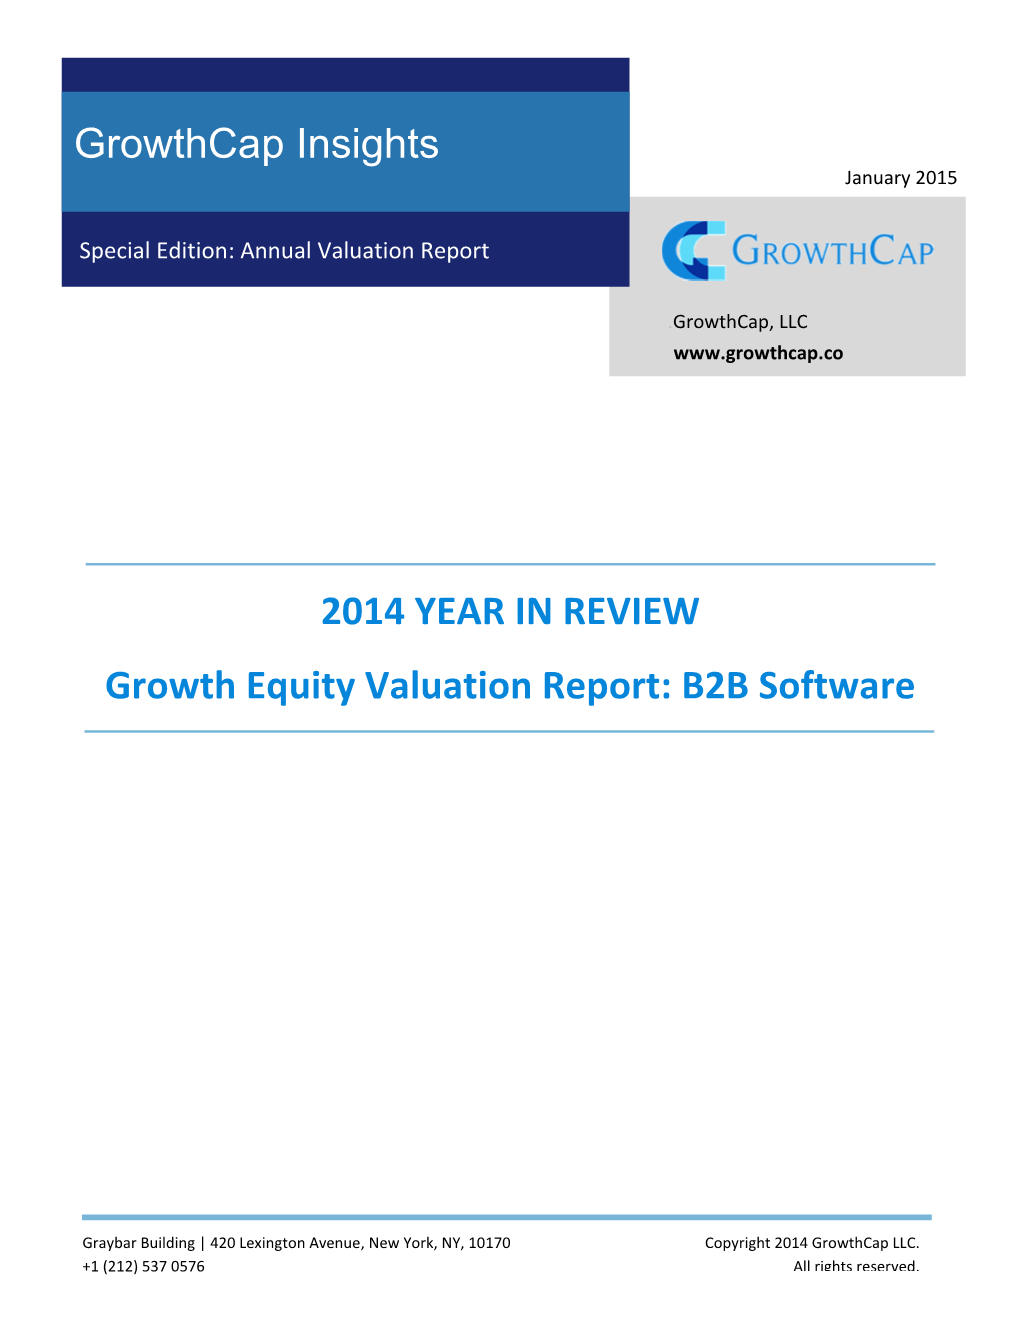 2014 YEAR in REVIEW Growth Equity Valuation Report: B2B Software